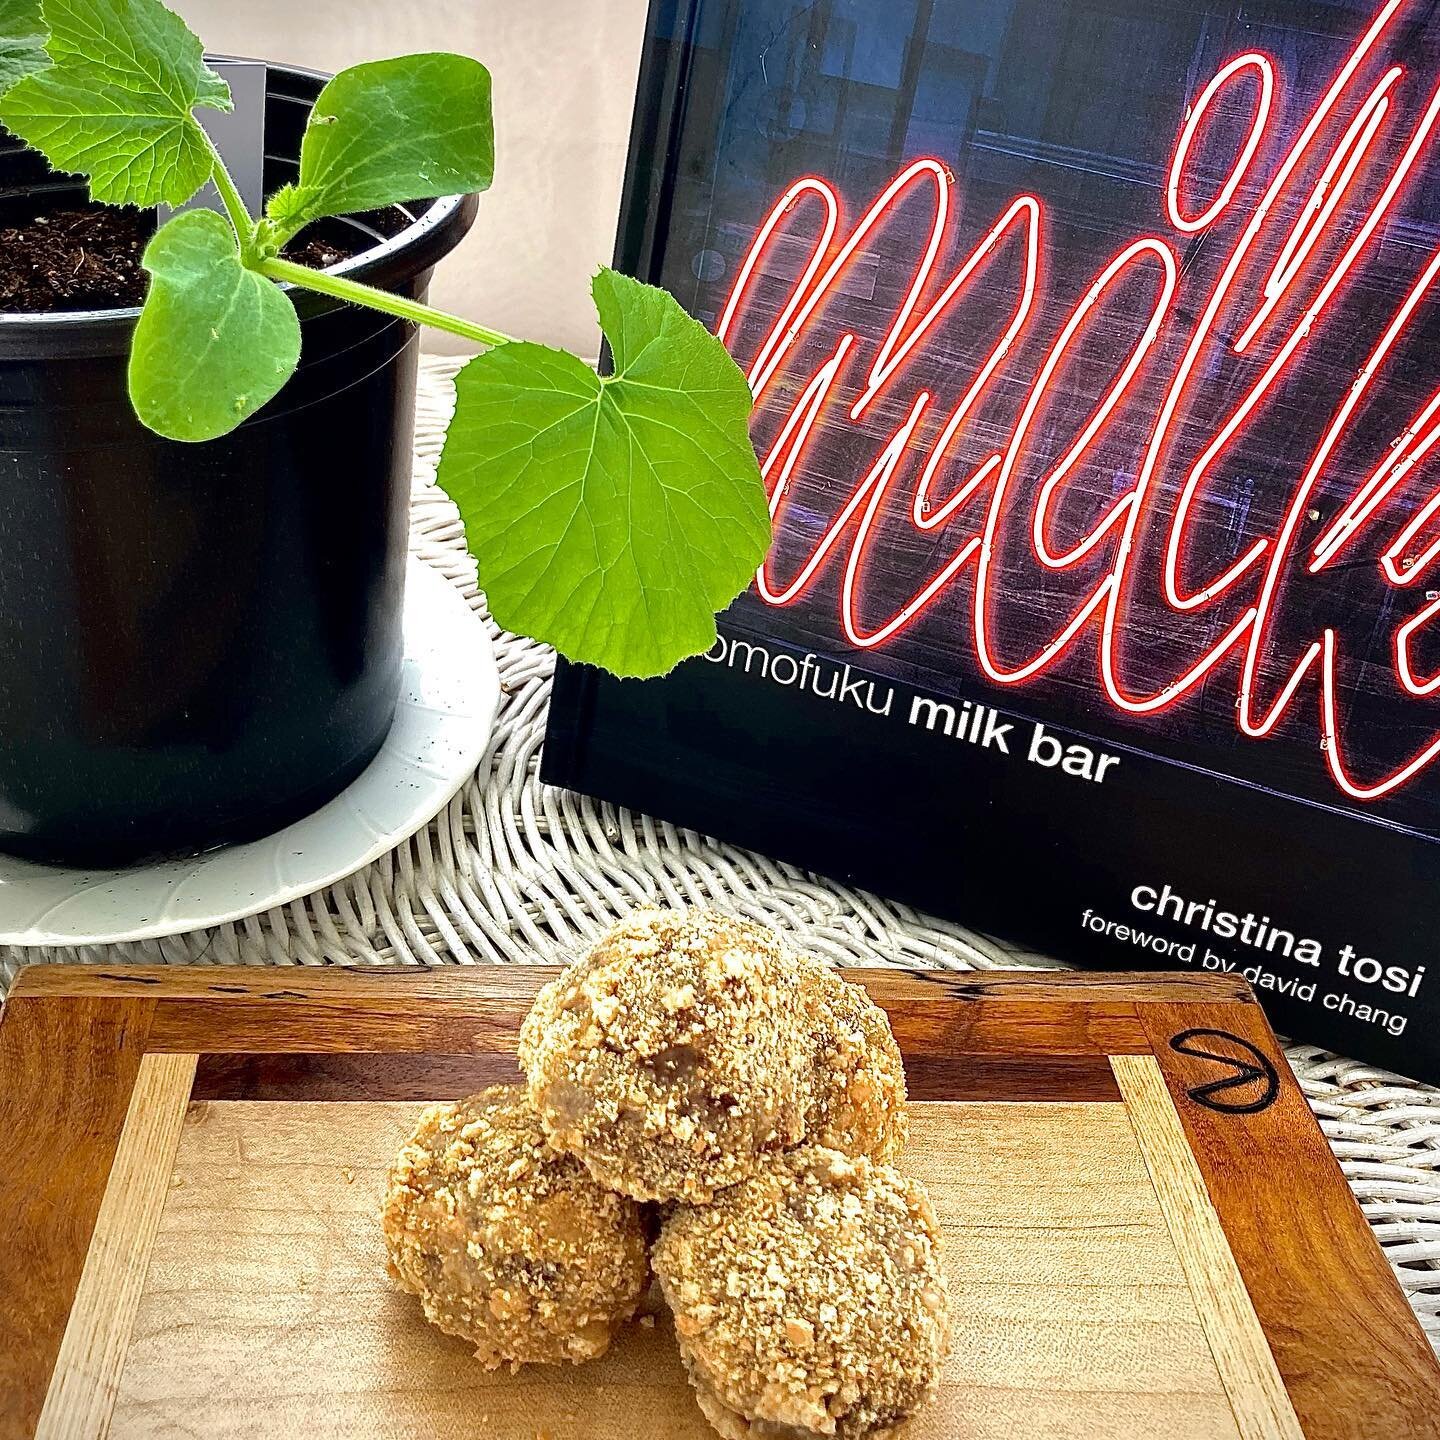 Inspired by milk bar&rsquo;s famous cake truffles (if you are a dessert lover I can't recommend this book enough!) and dreams of zucchini gardens (planted aggressively early), we whipped up some zucchini muffin truffles with Nutella and brown butter 